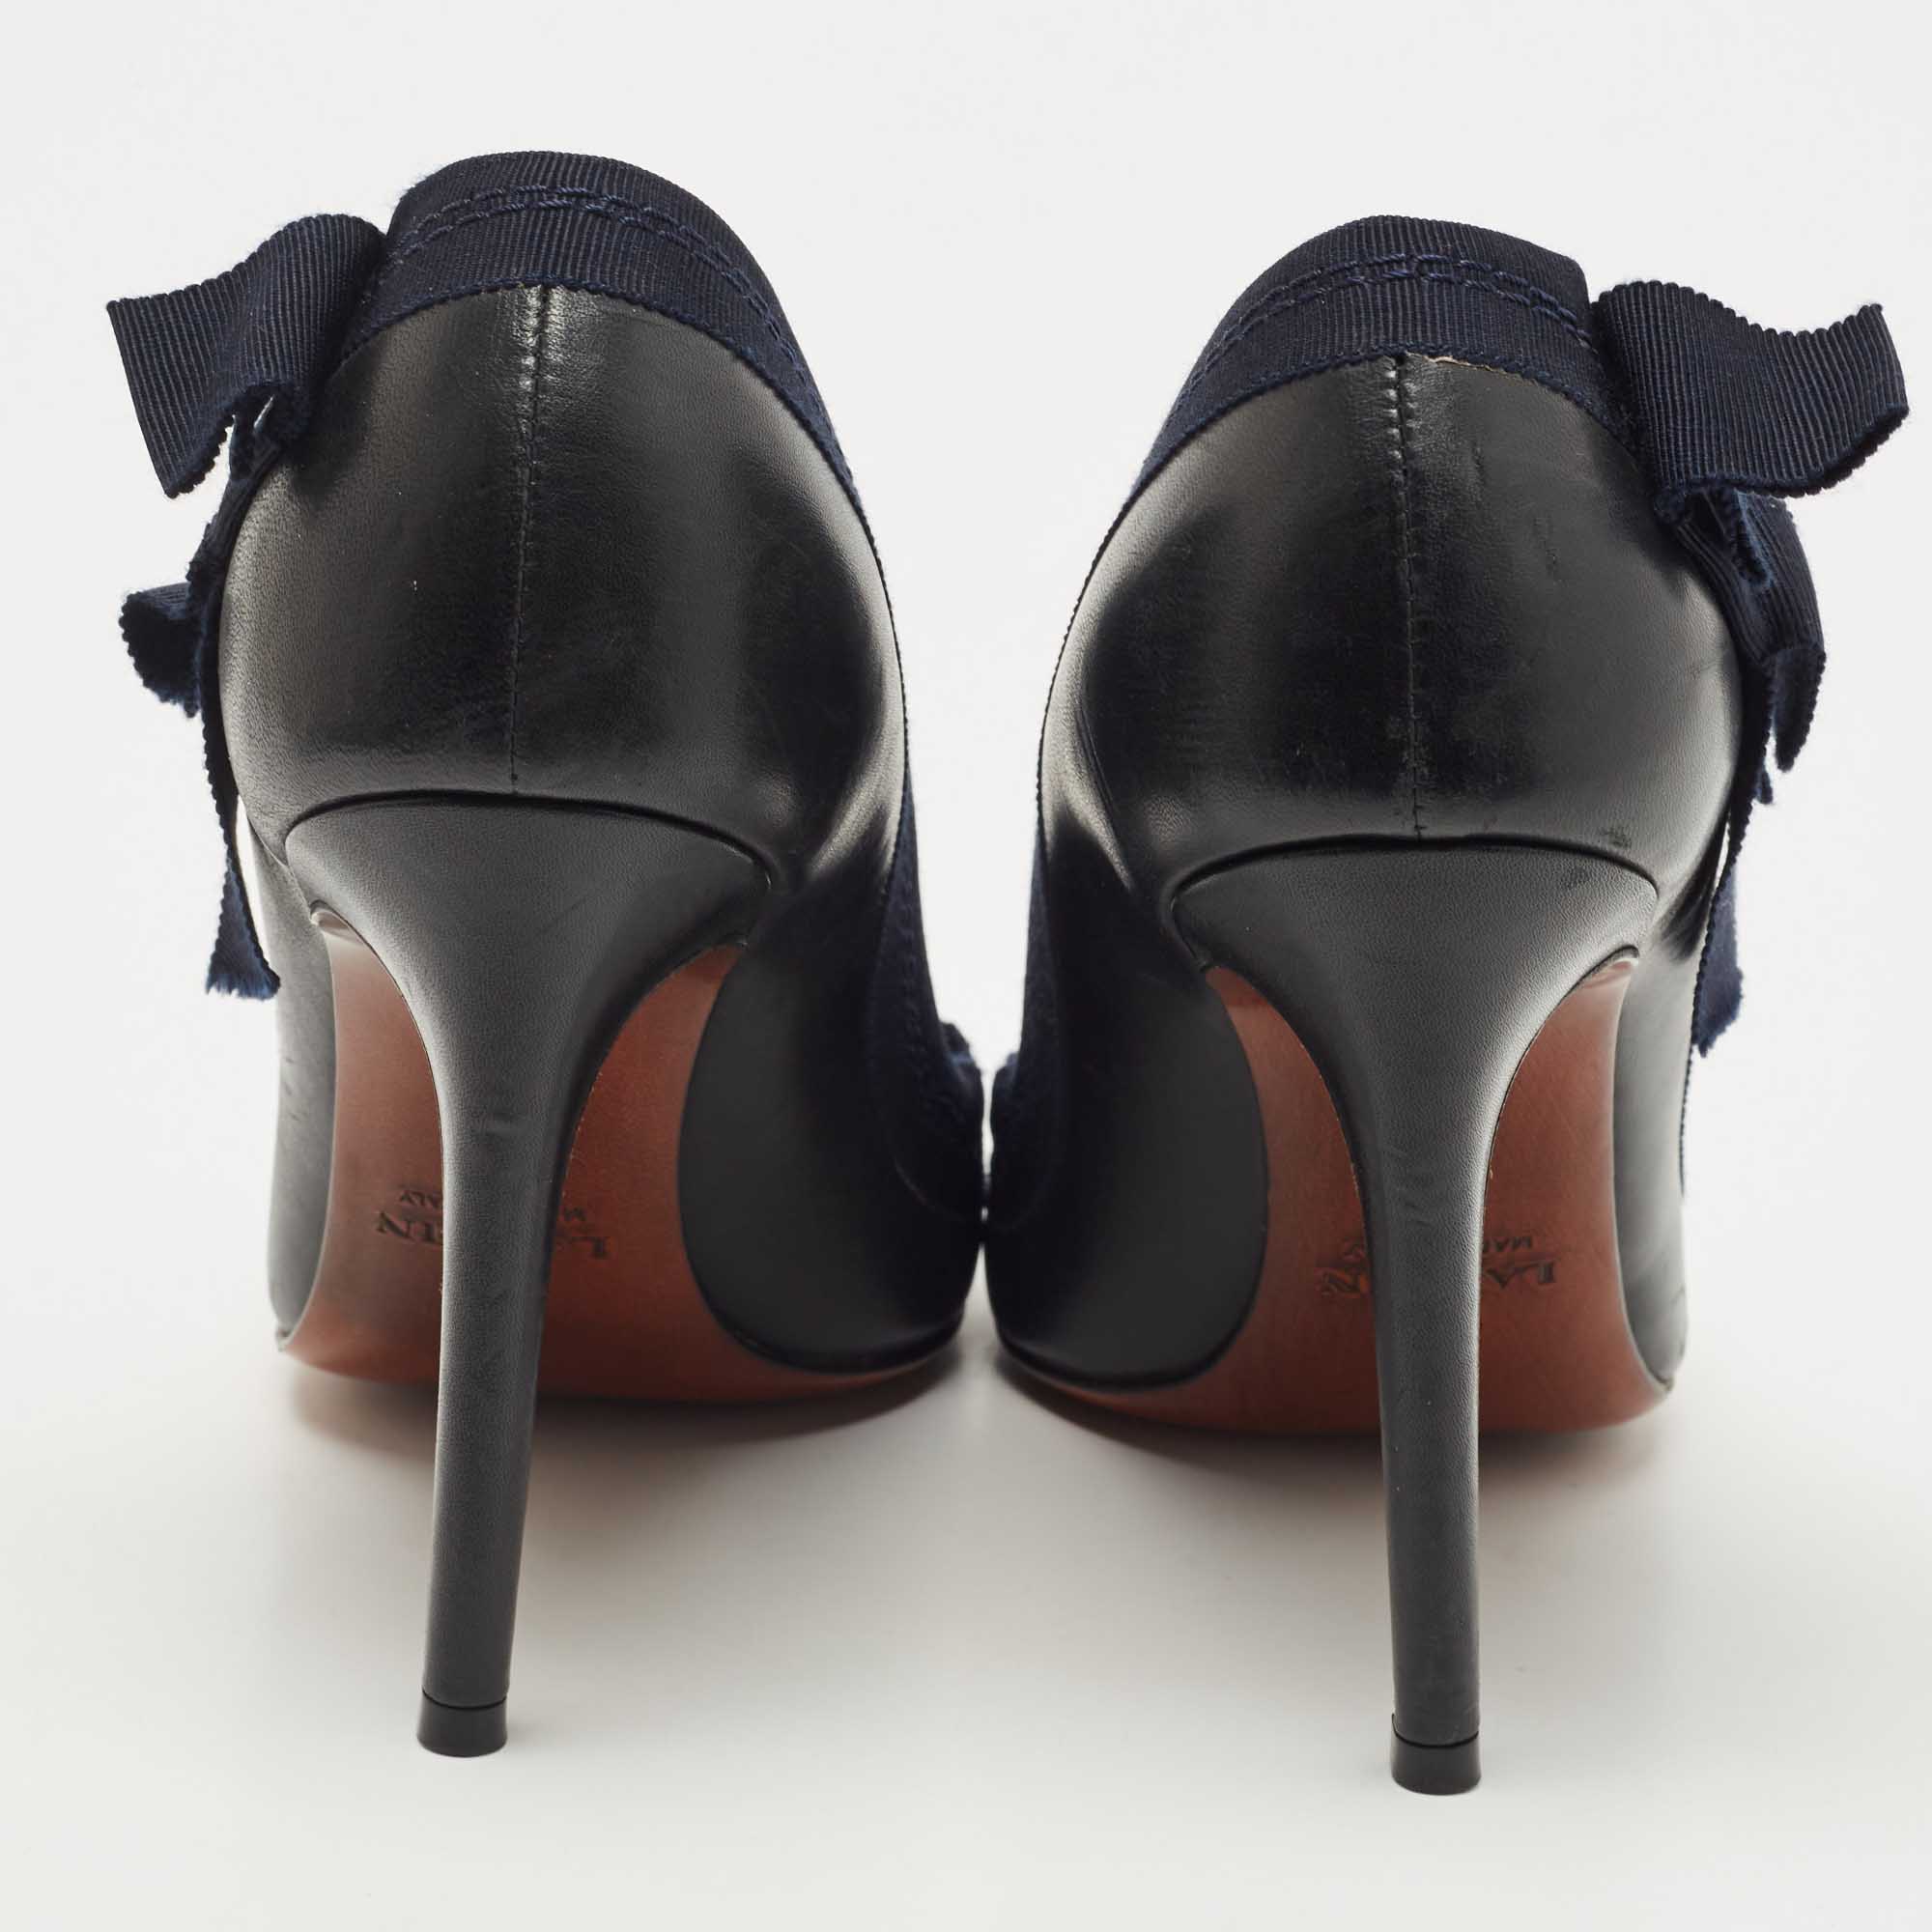 Lanvin Black/Navy Blue Leather And Ribbon Bow Pumps Size 38